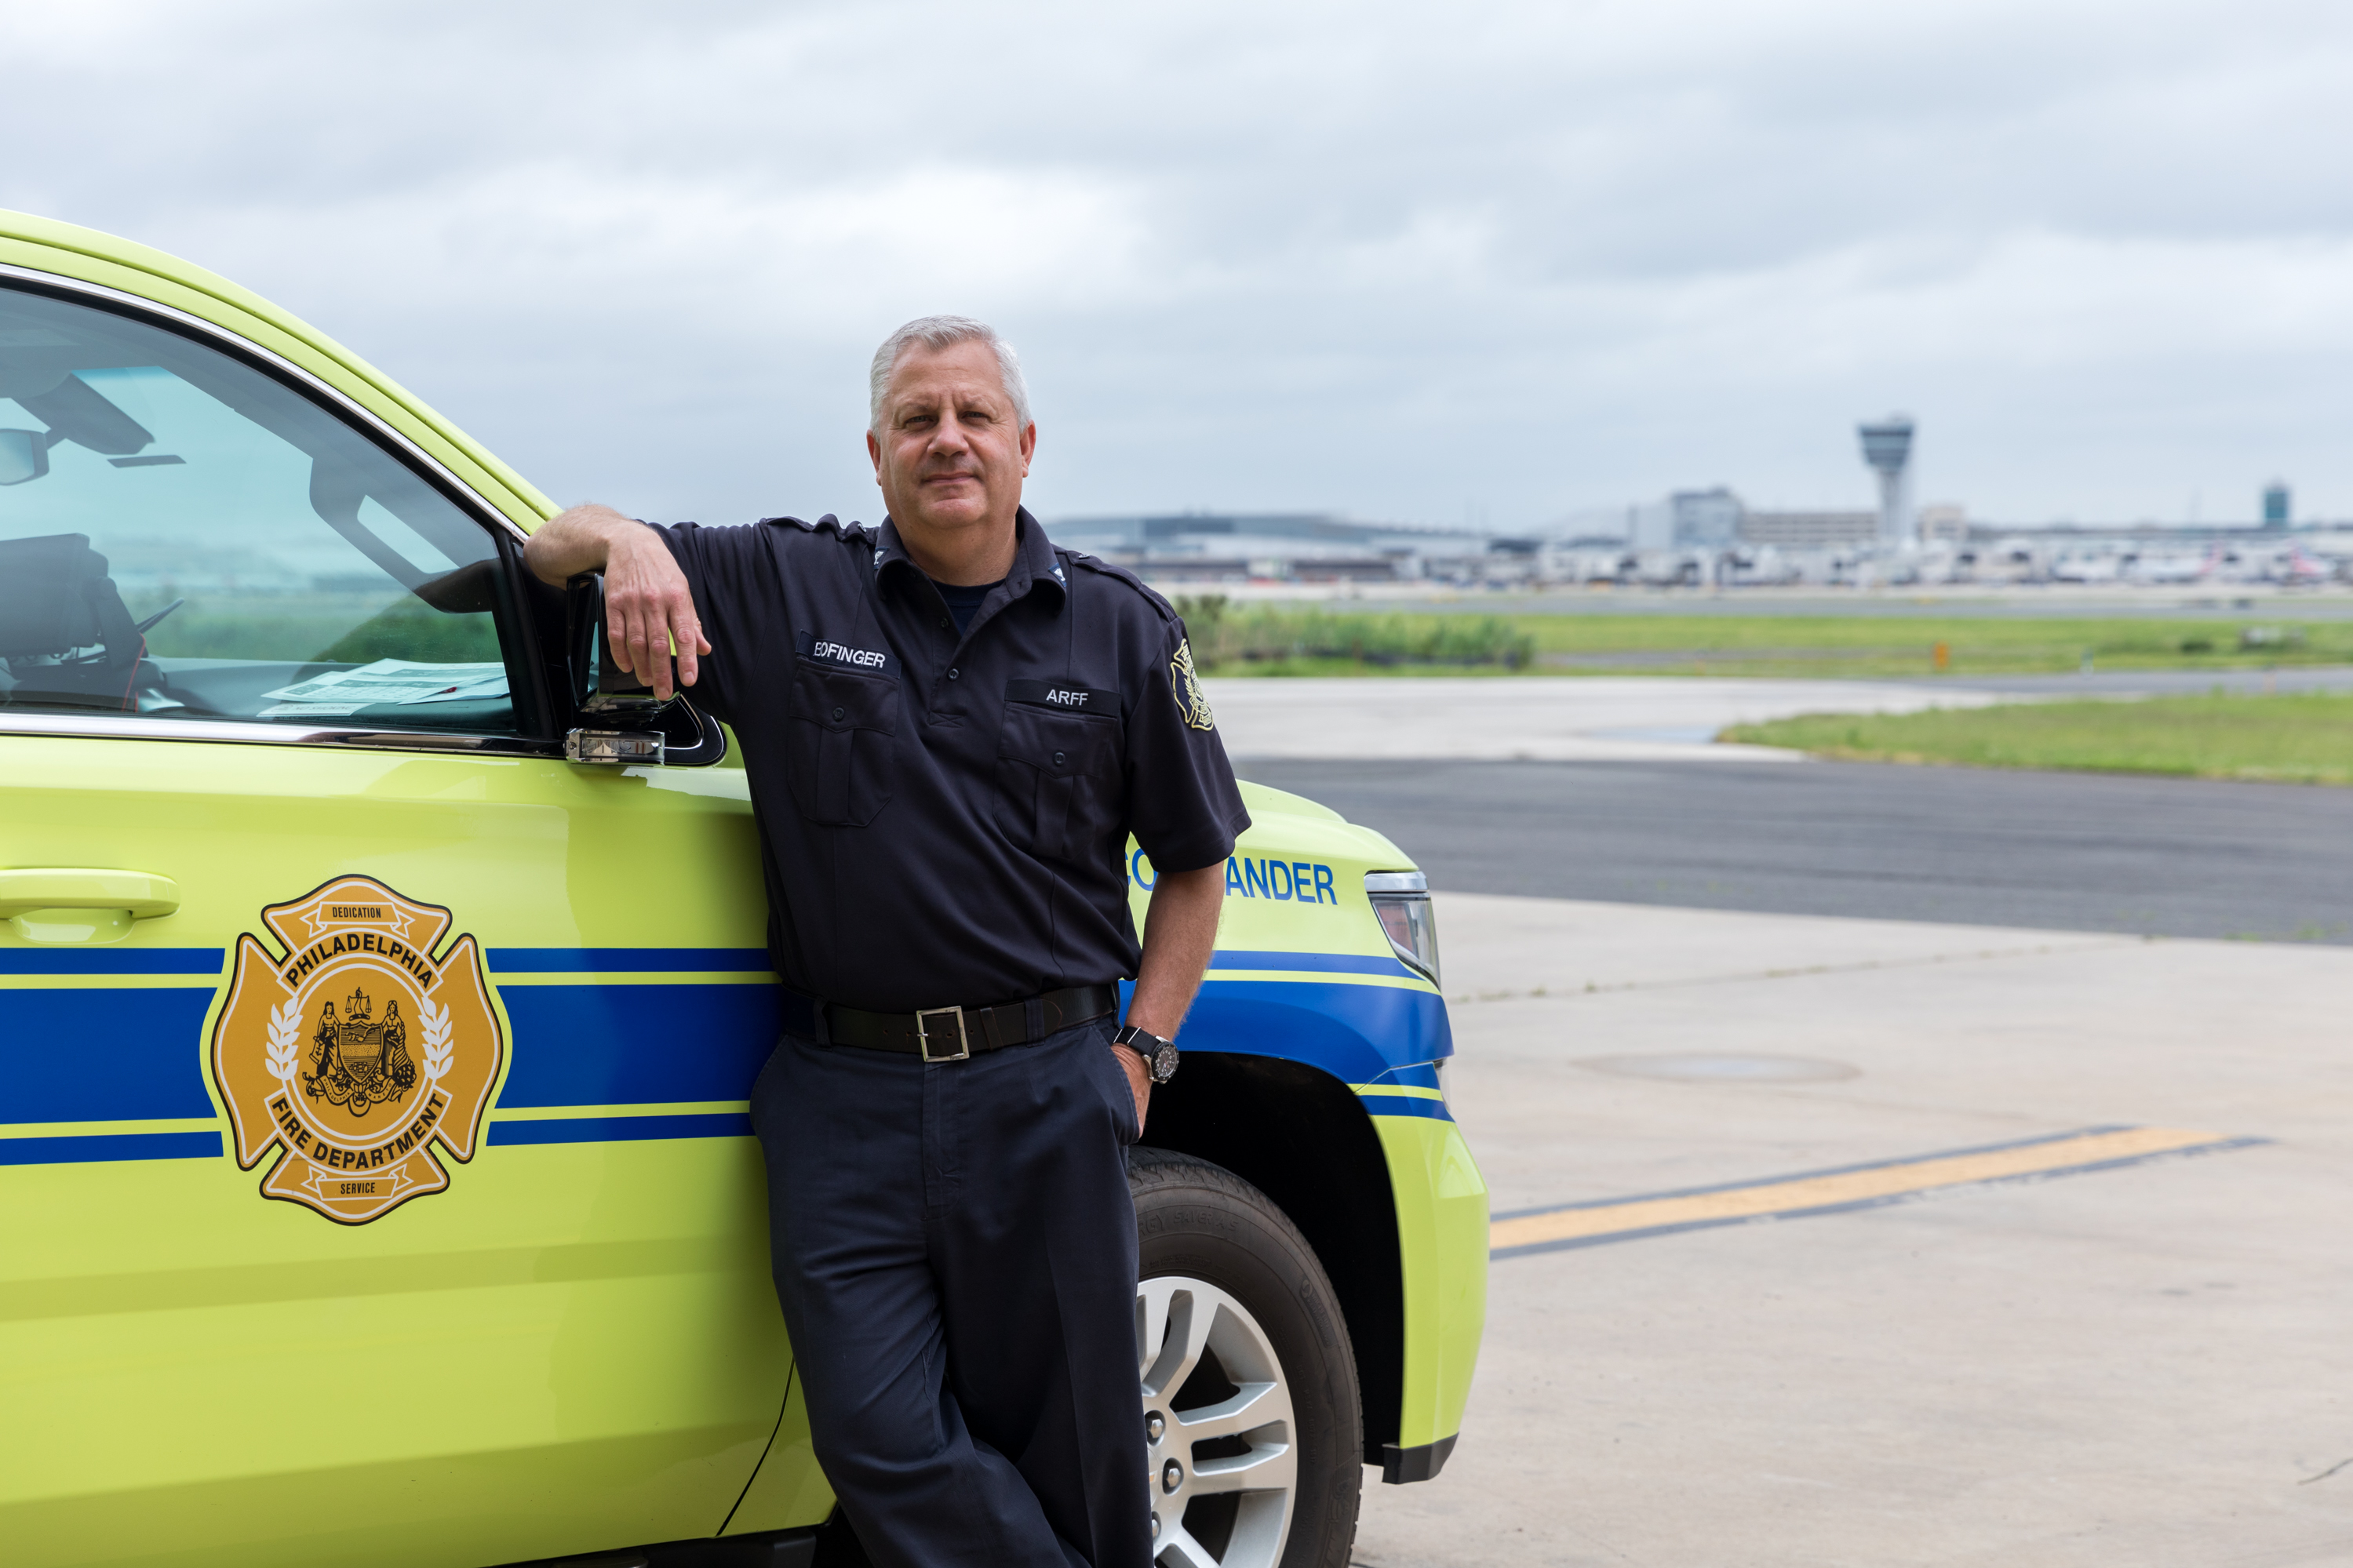 Deputy Fire Chief Marc Bofinger brings a wealth of experience to the PFD's ARFF unit at PHL